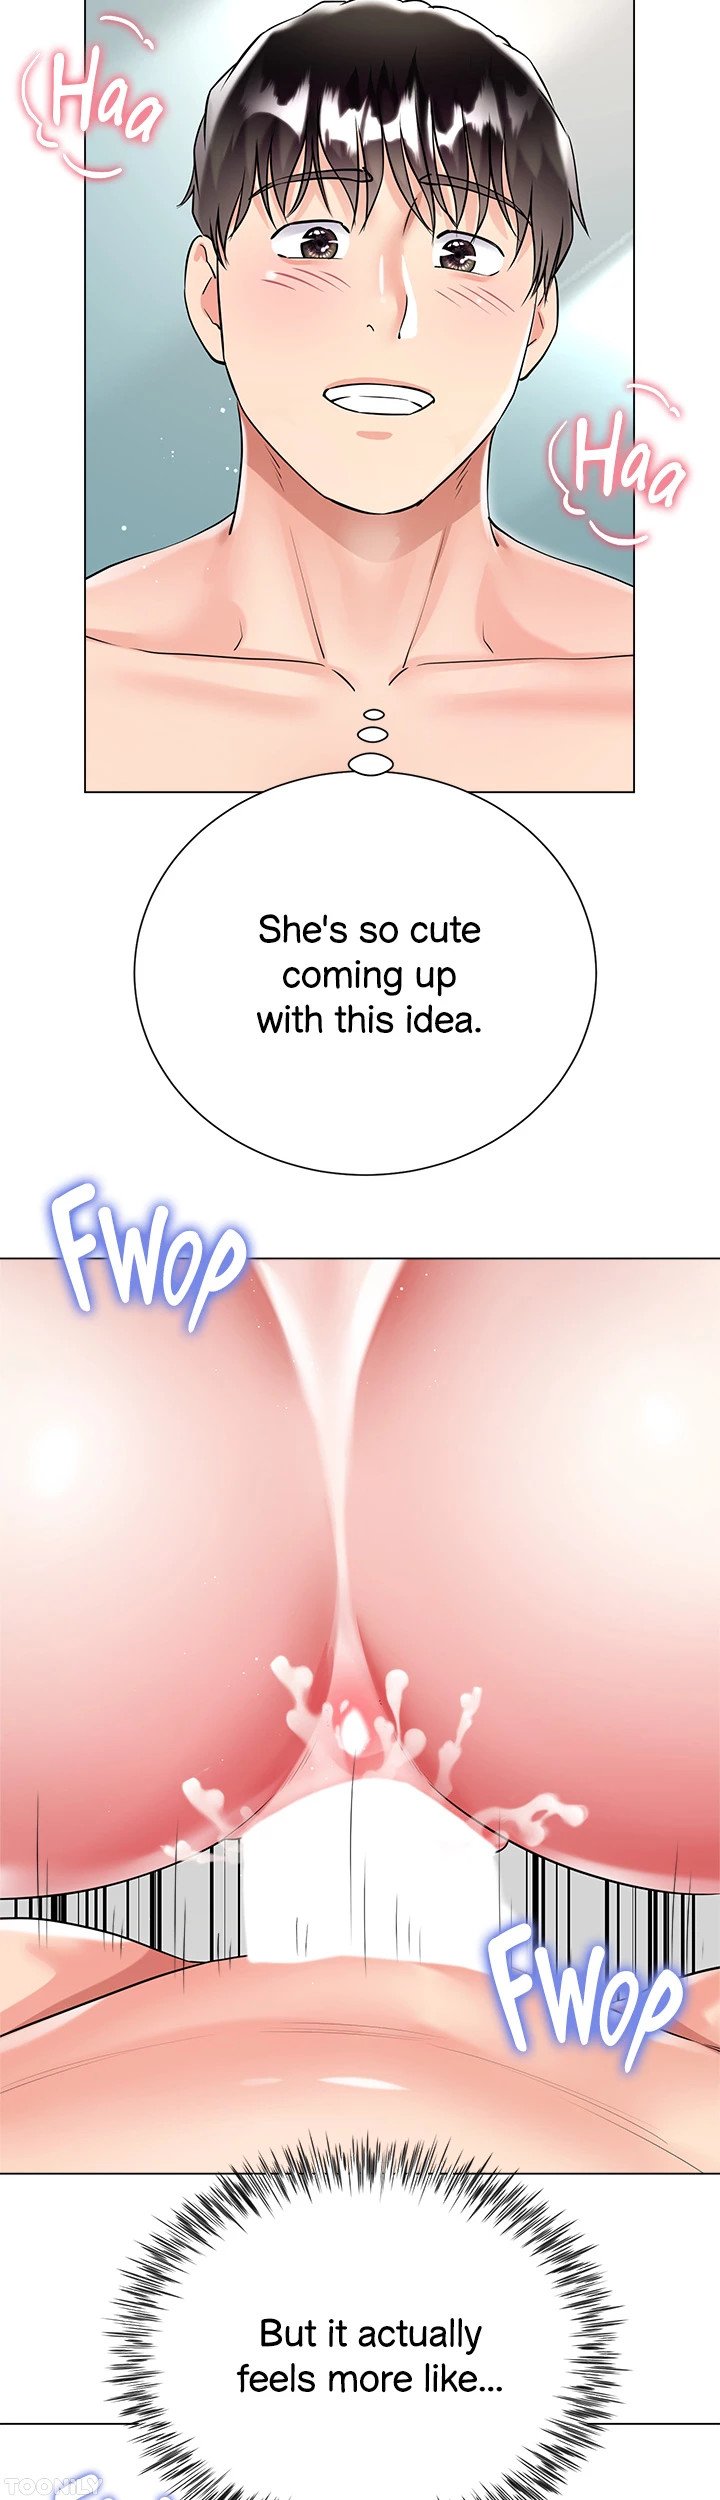 my-sister-in-laws-skirt-chap-44-9